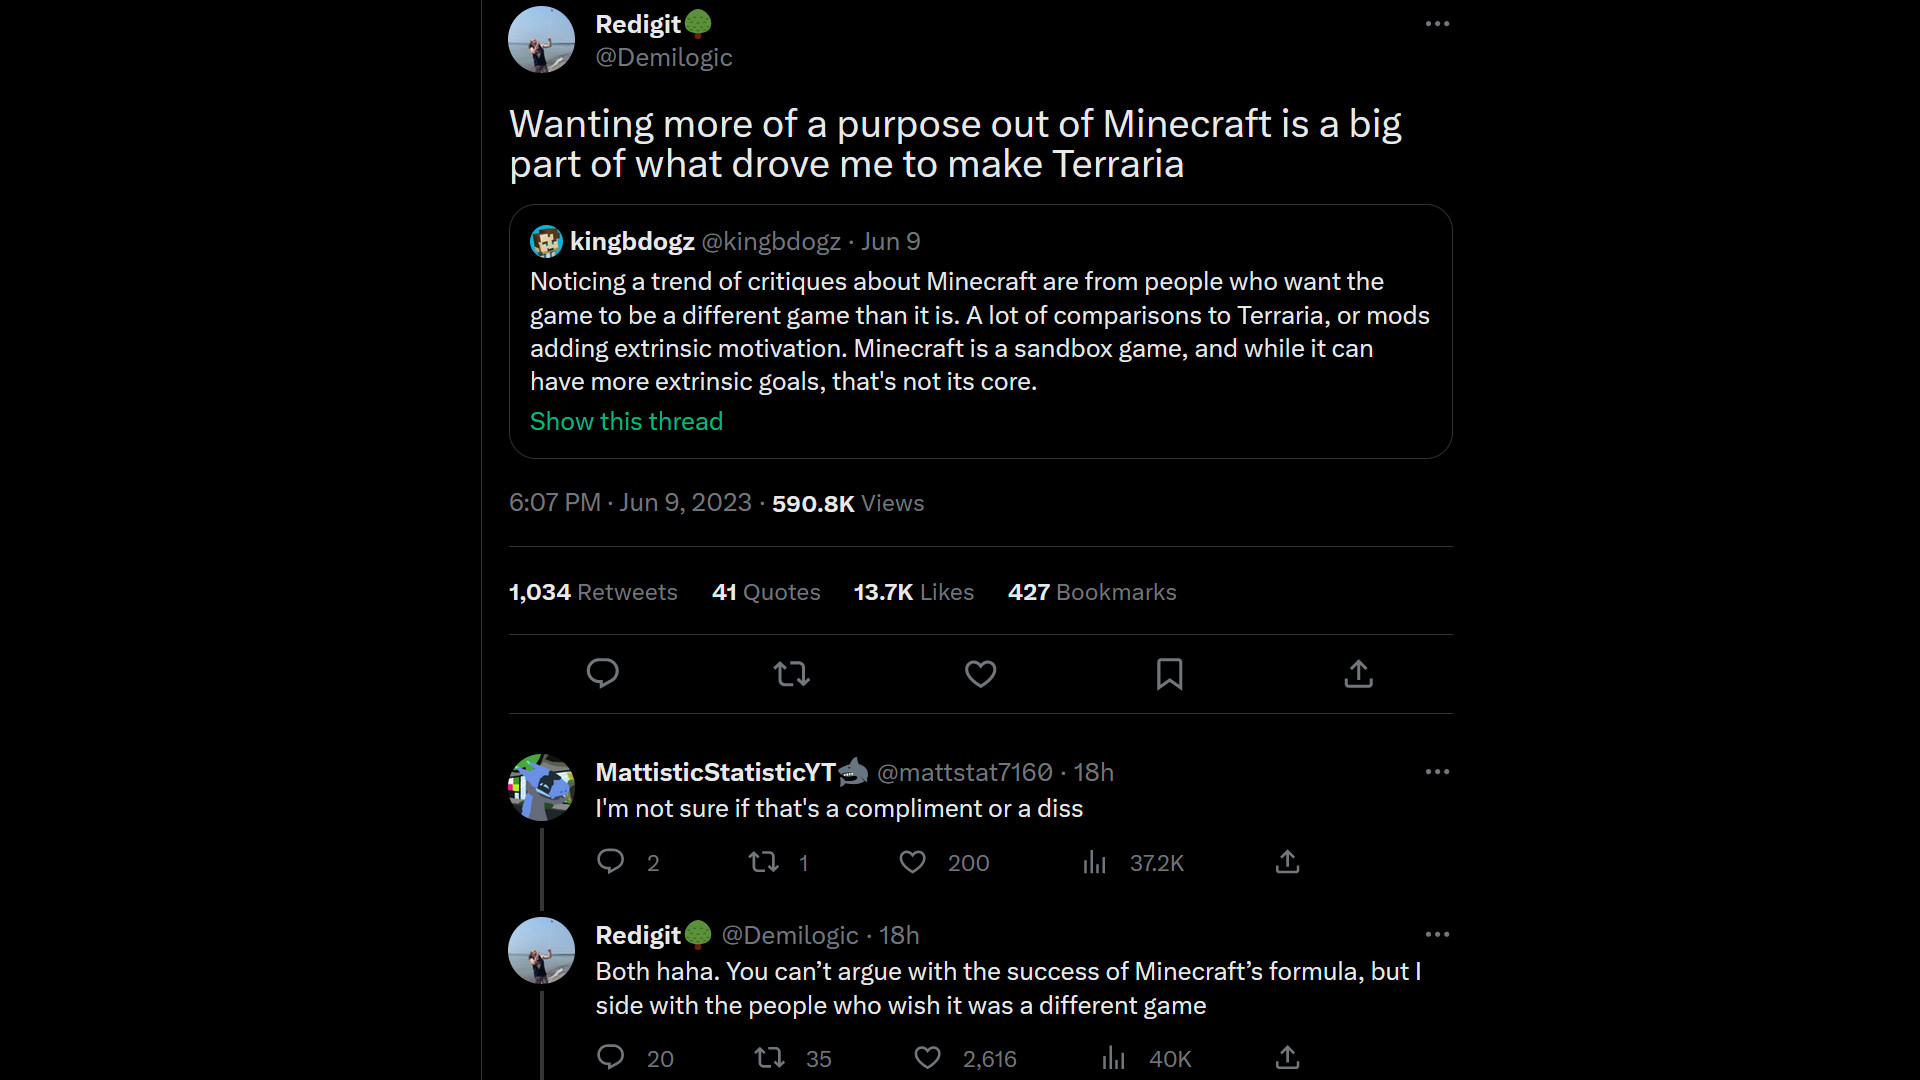 Terraria's creator “wanted more of a purpose out of Minecraft”